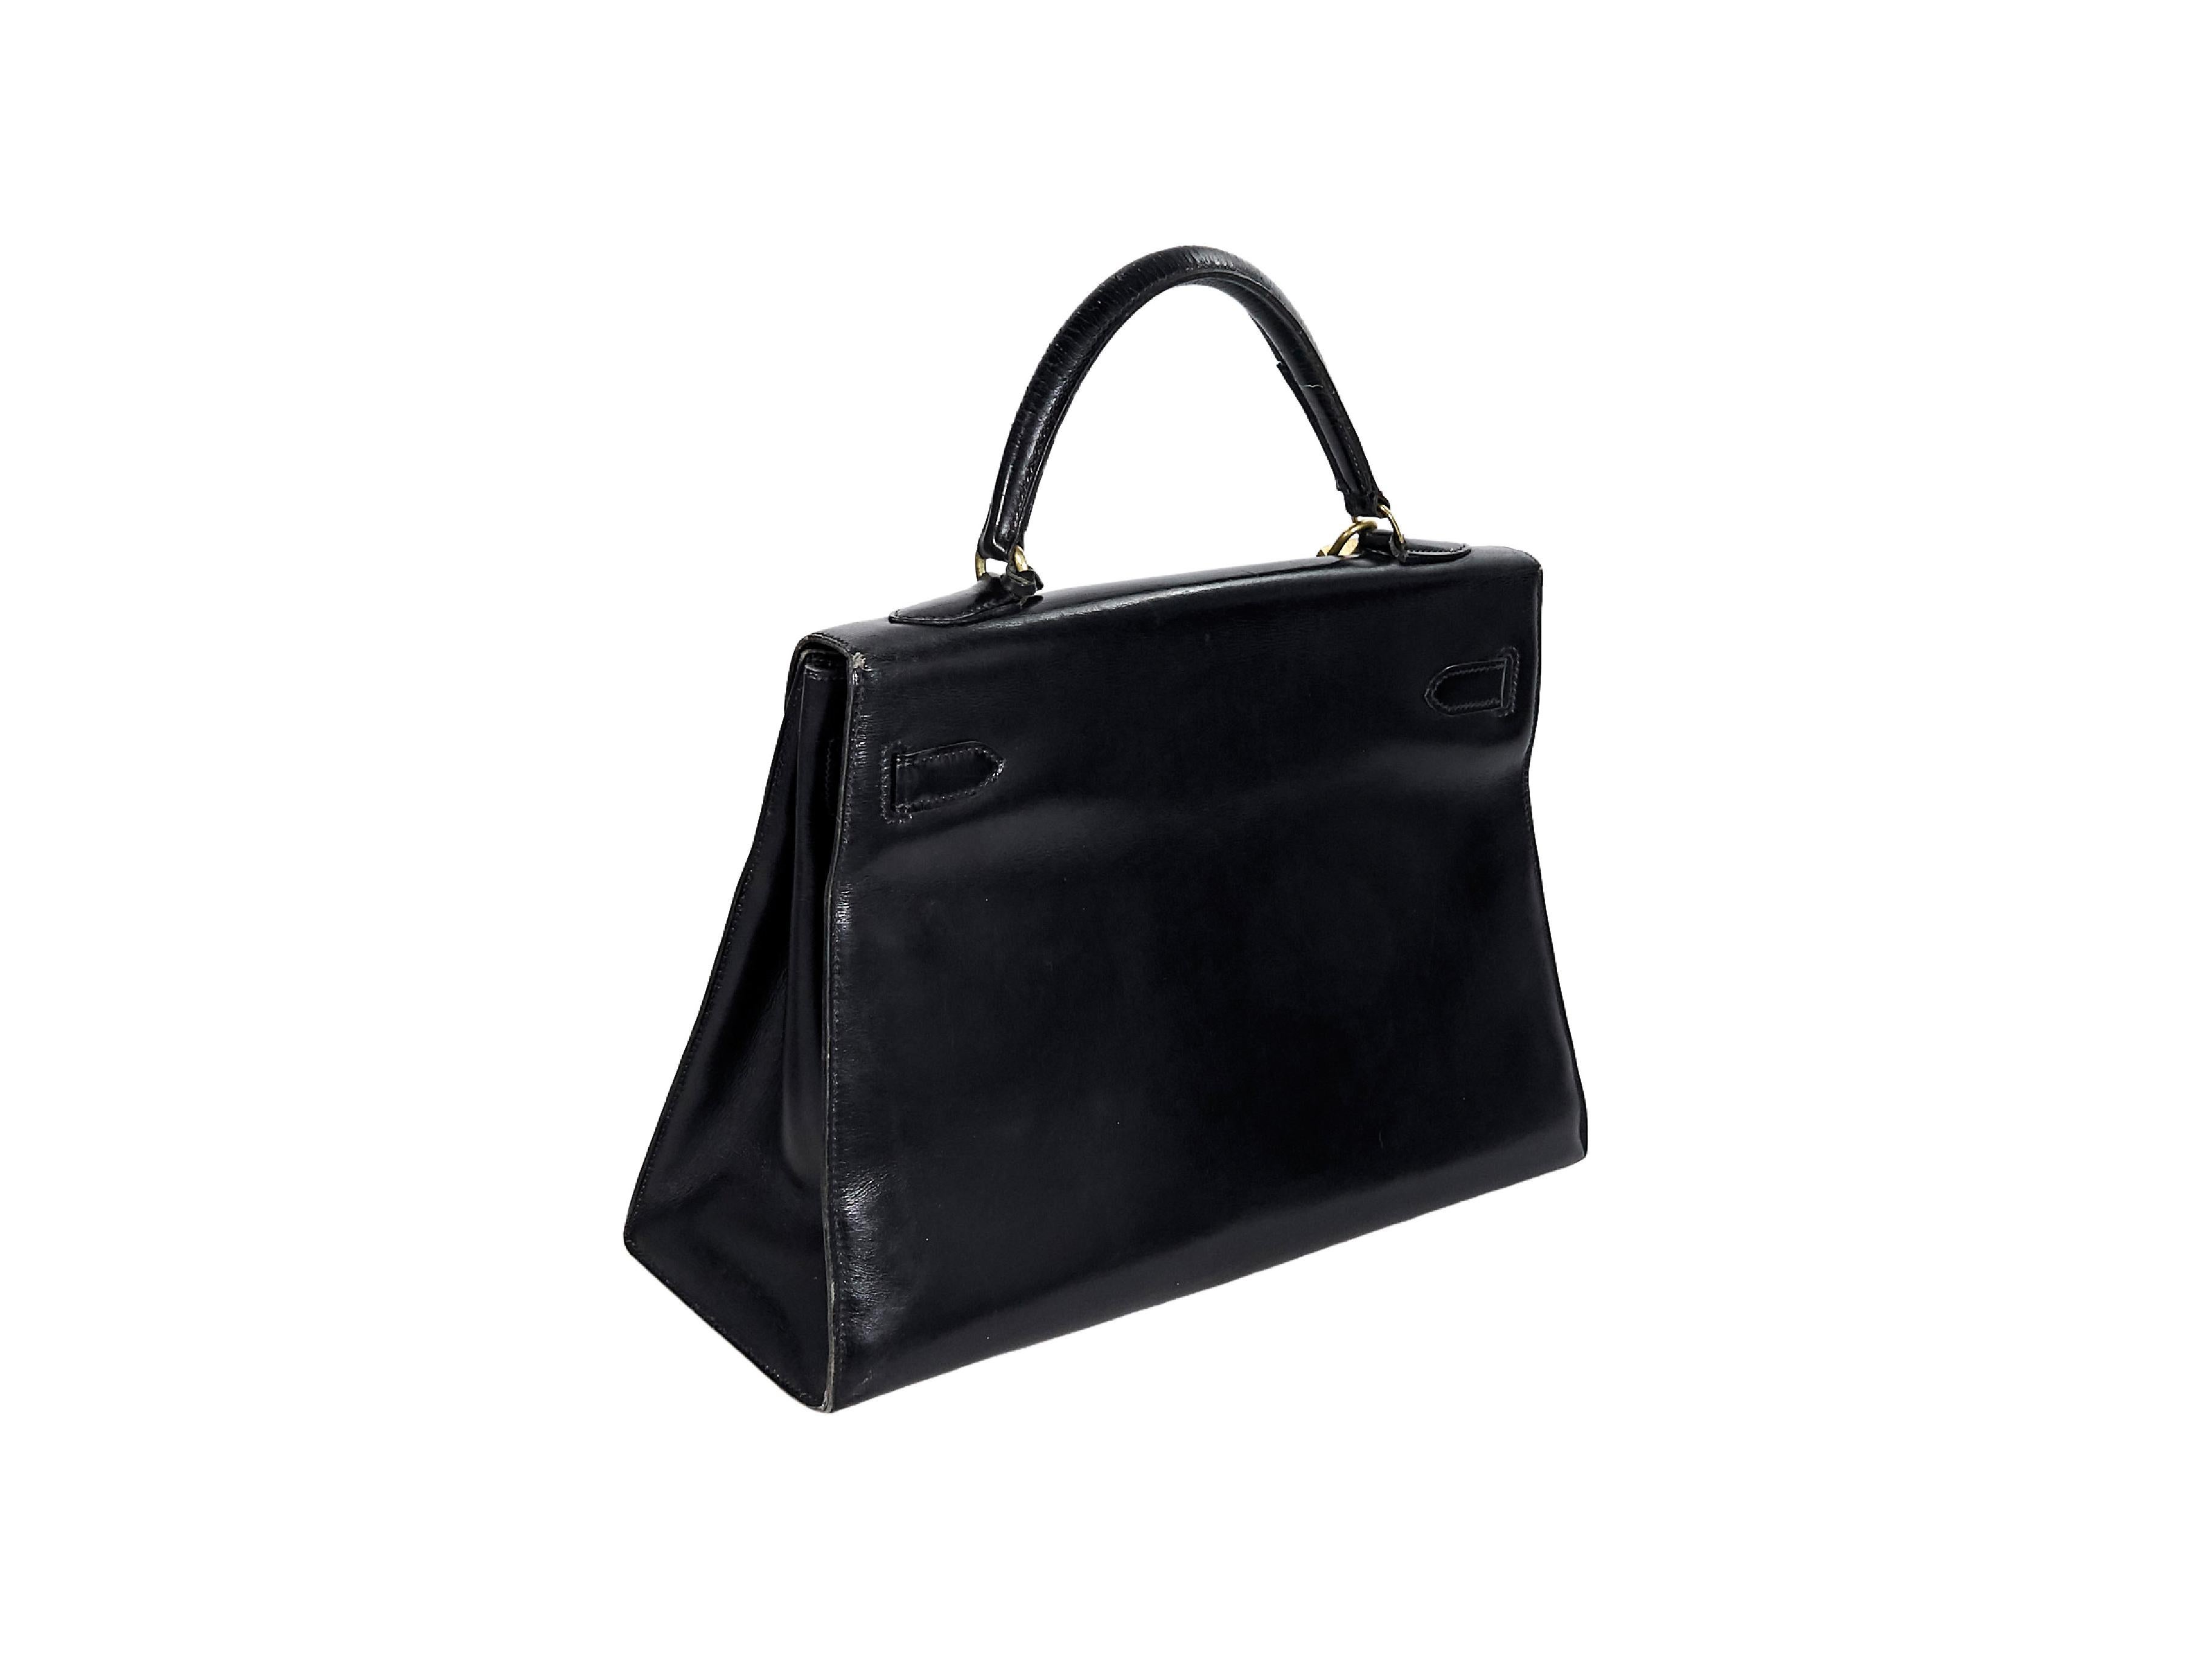 Product details:  Vintage black leather Kelly handbag by Hermes.  Top carry handle.  Front flap with lock-and-key strap closure.  Leather interior with slide pockets.  Protective metal feet.  Goldtone hardware.  12